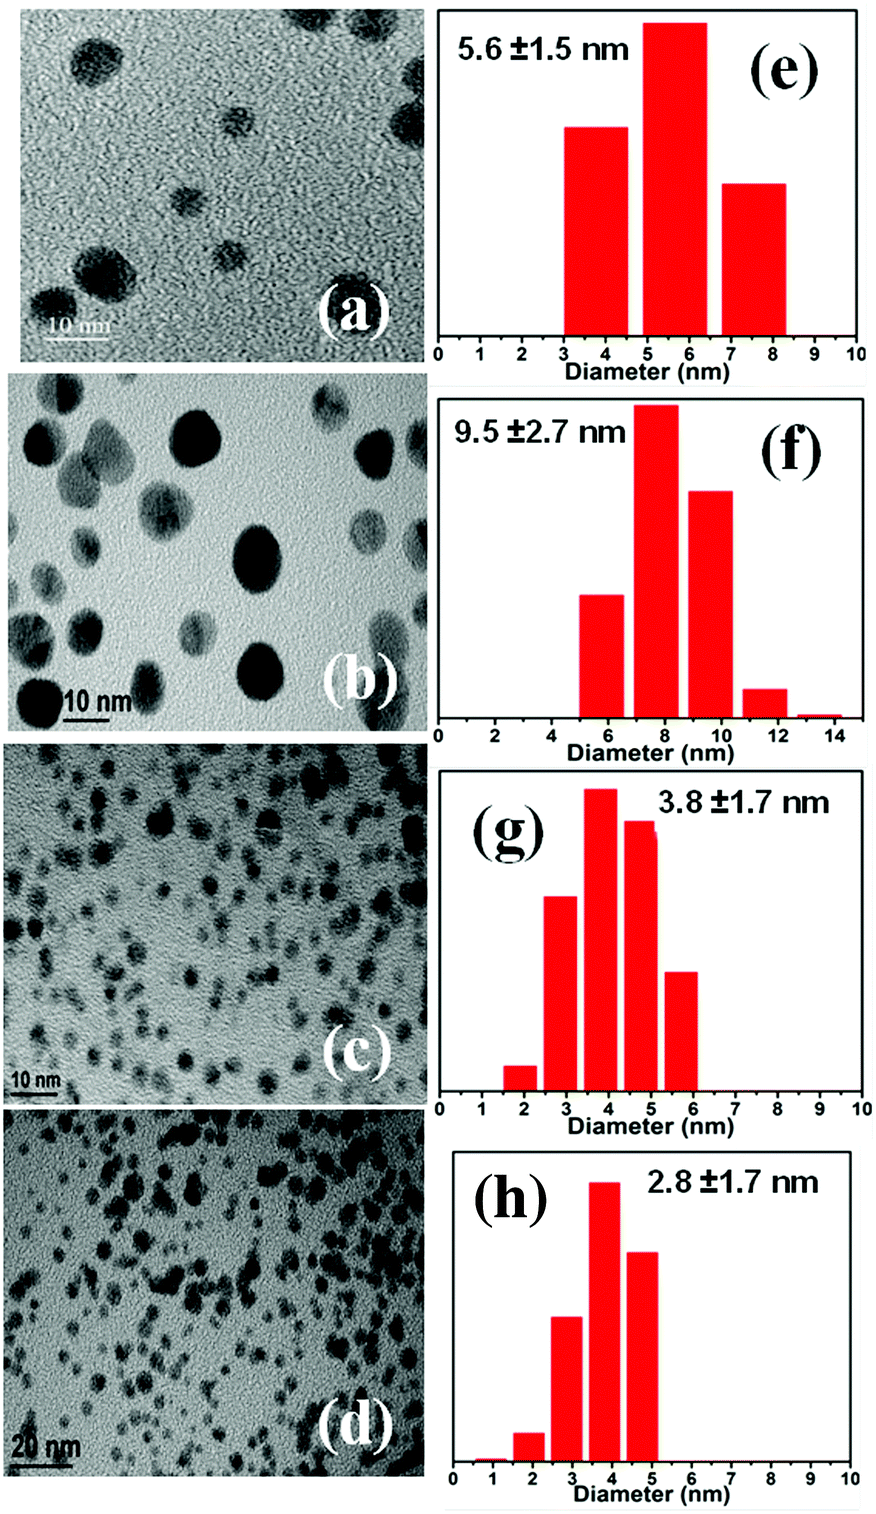 Rapid Gram Scale Synthesis Of Au Chitosan Nanoparticles Catalysts Using Solid Mortar Grinding New Journal Of Chemistry Rsc Publishing Doi 10 1039 D0njb